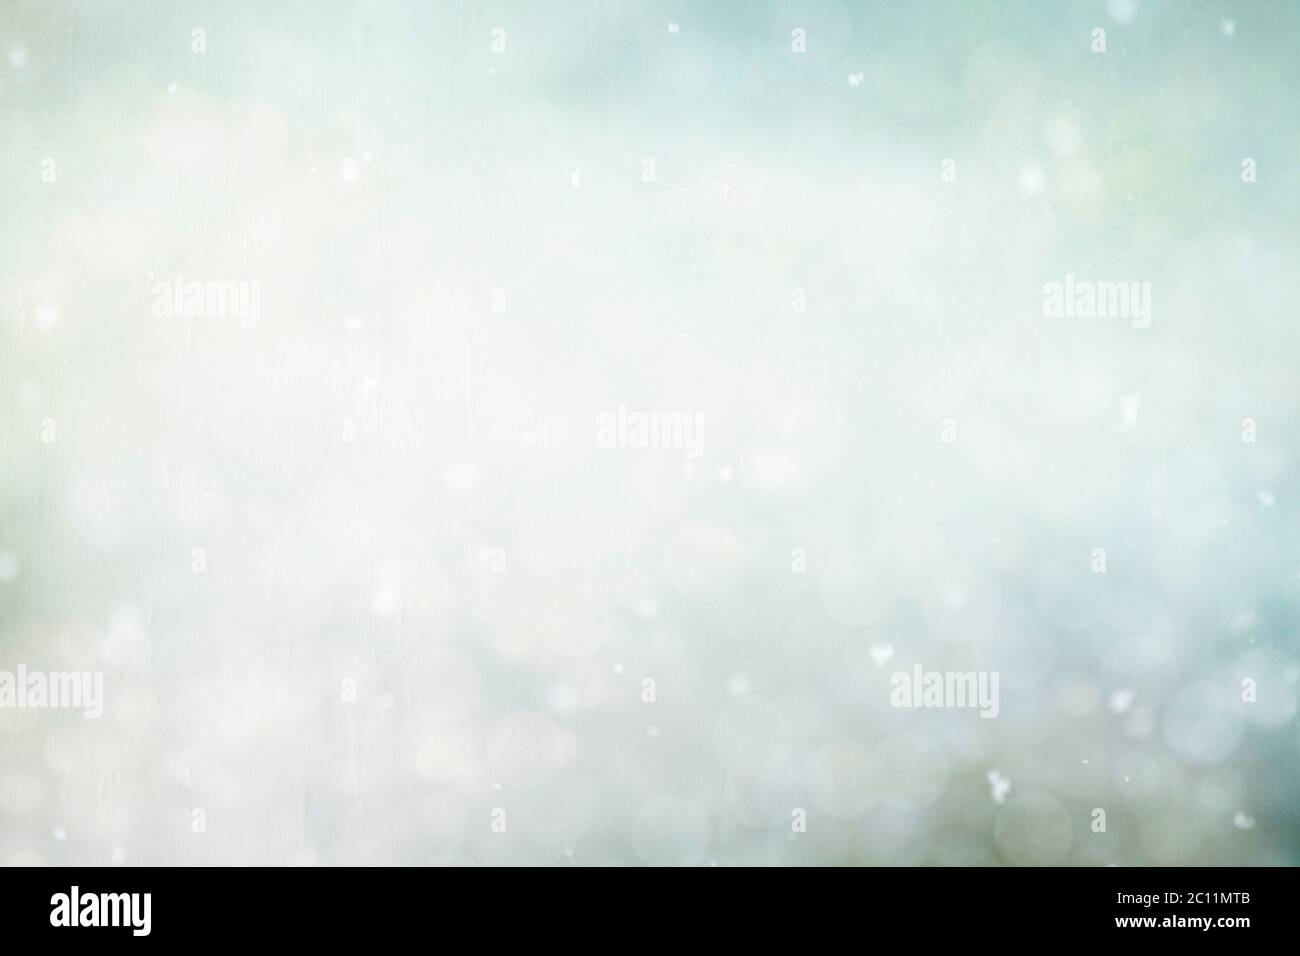 Snow falling and floating on the air, wintry xmas abstract background Stock Photo